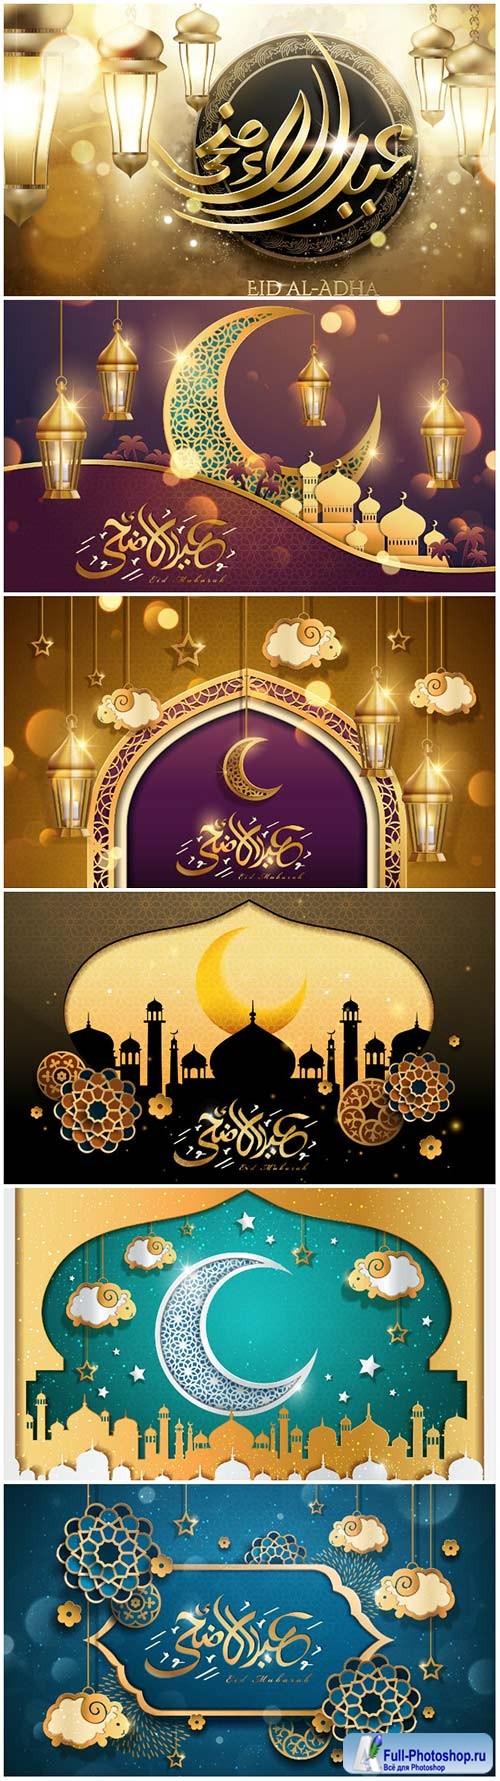 Ramadan Kareem vector calligraphy design with decorative floral pattern, mosque silhouette, crescent and glittering islamic background # 55